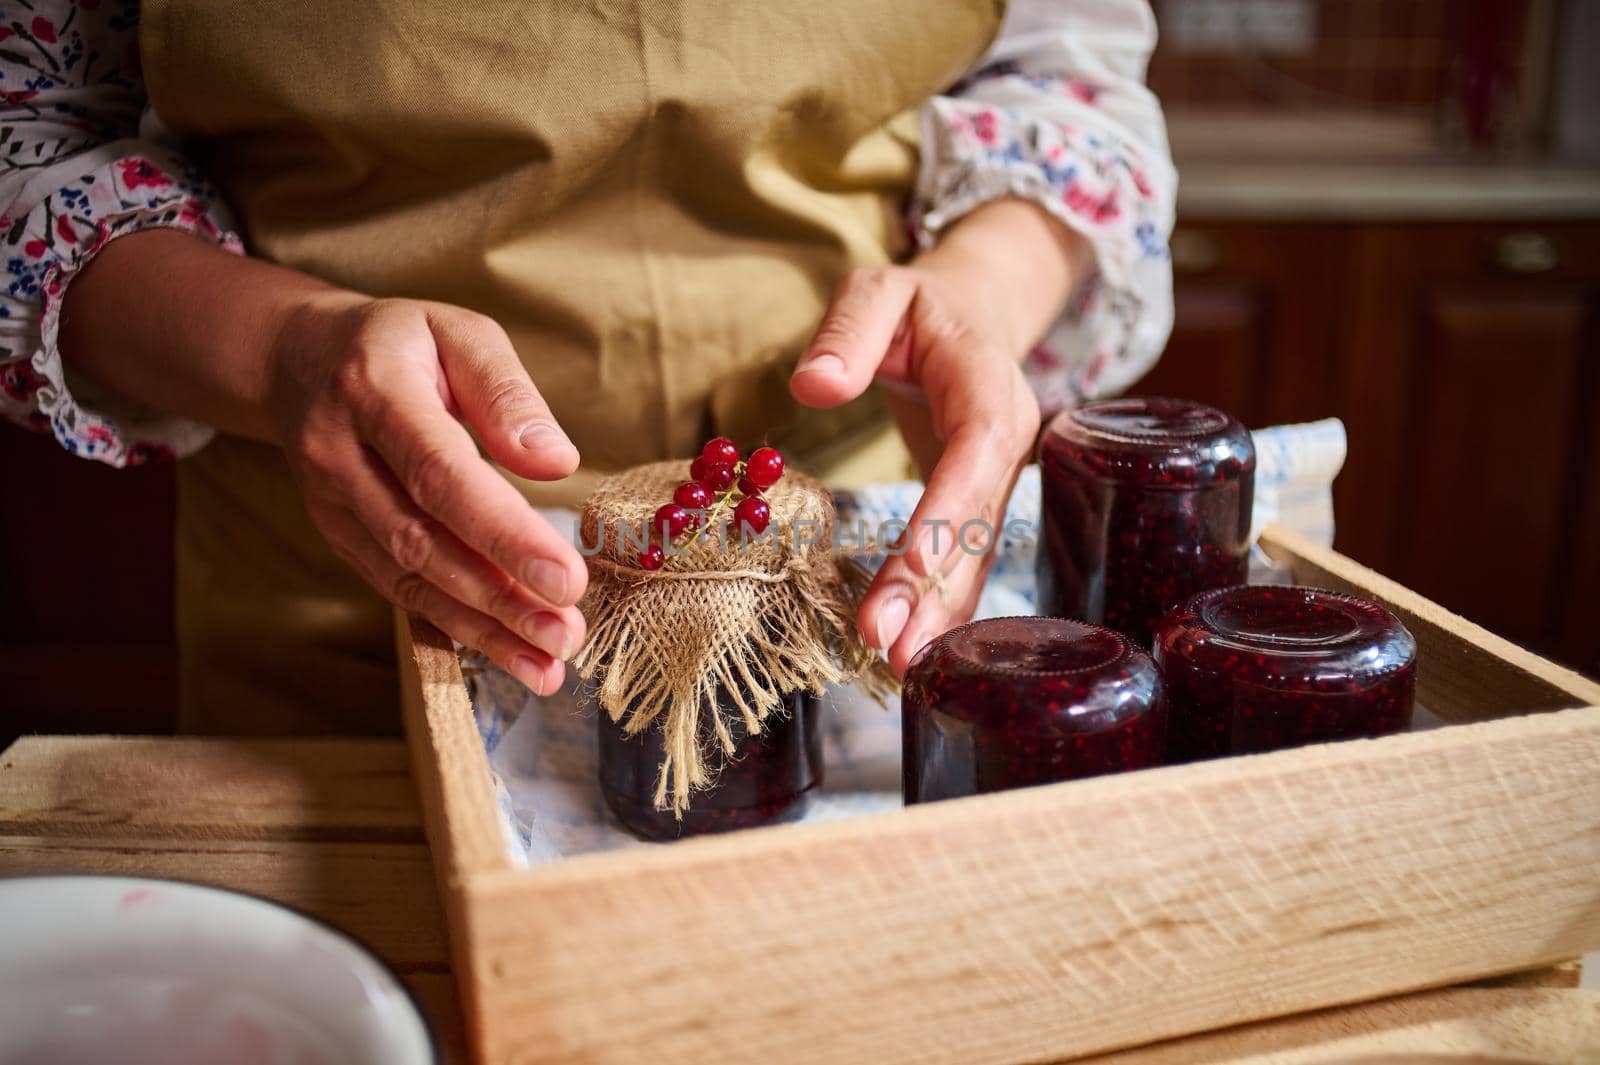 Woman hands next to a jar with jam, ornate with red currant berries on the burlap on the cover by artgf